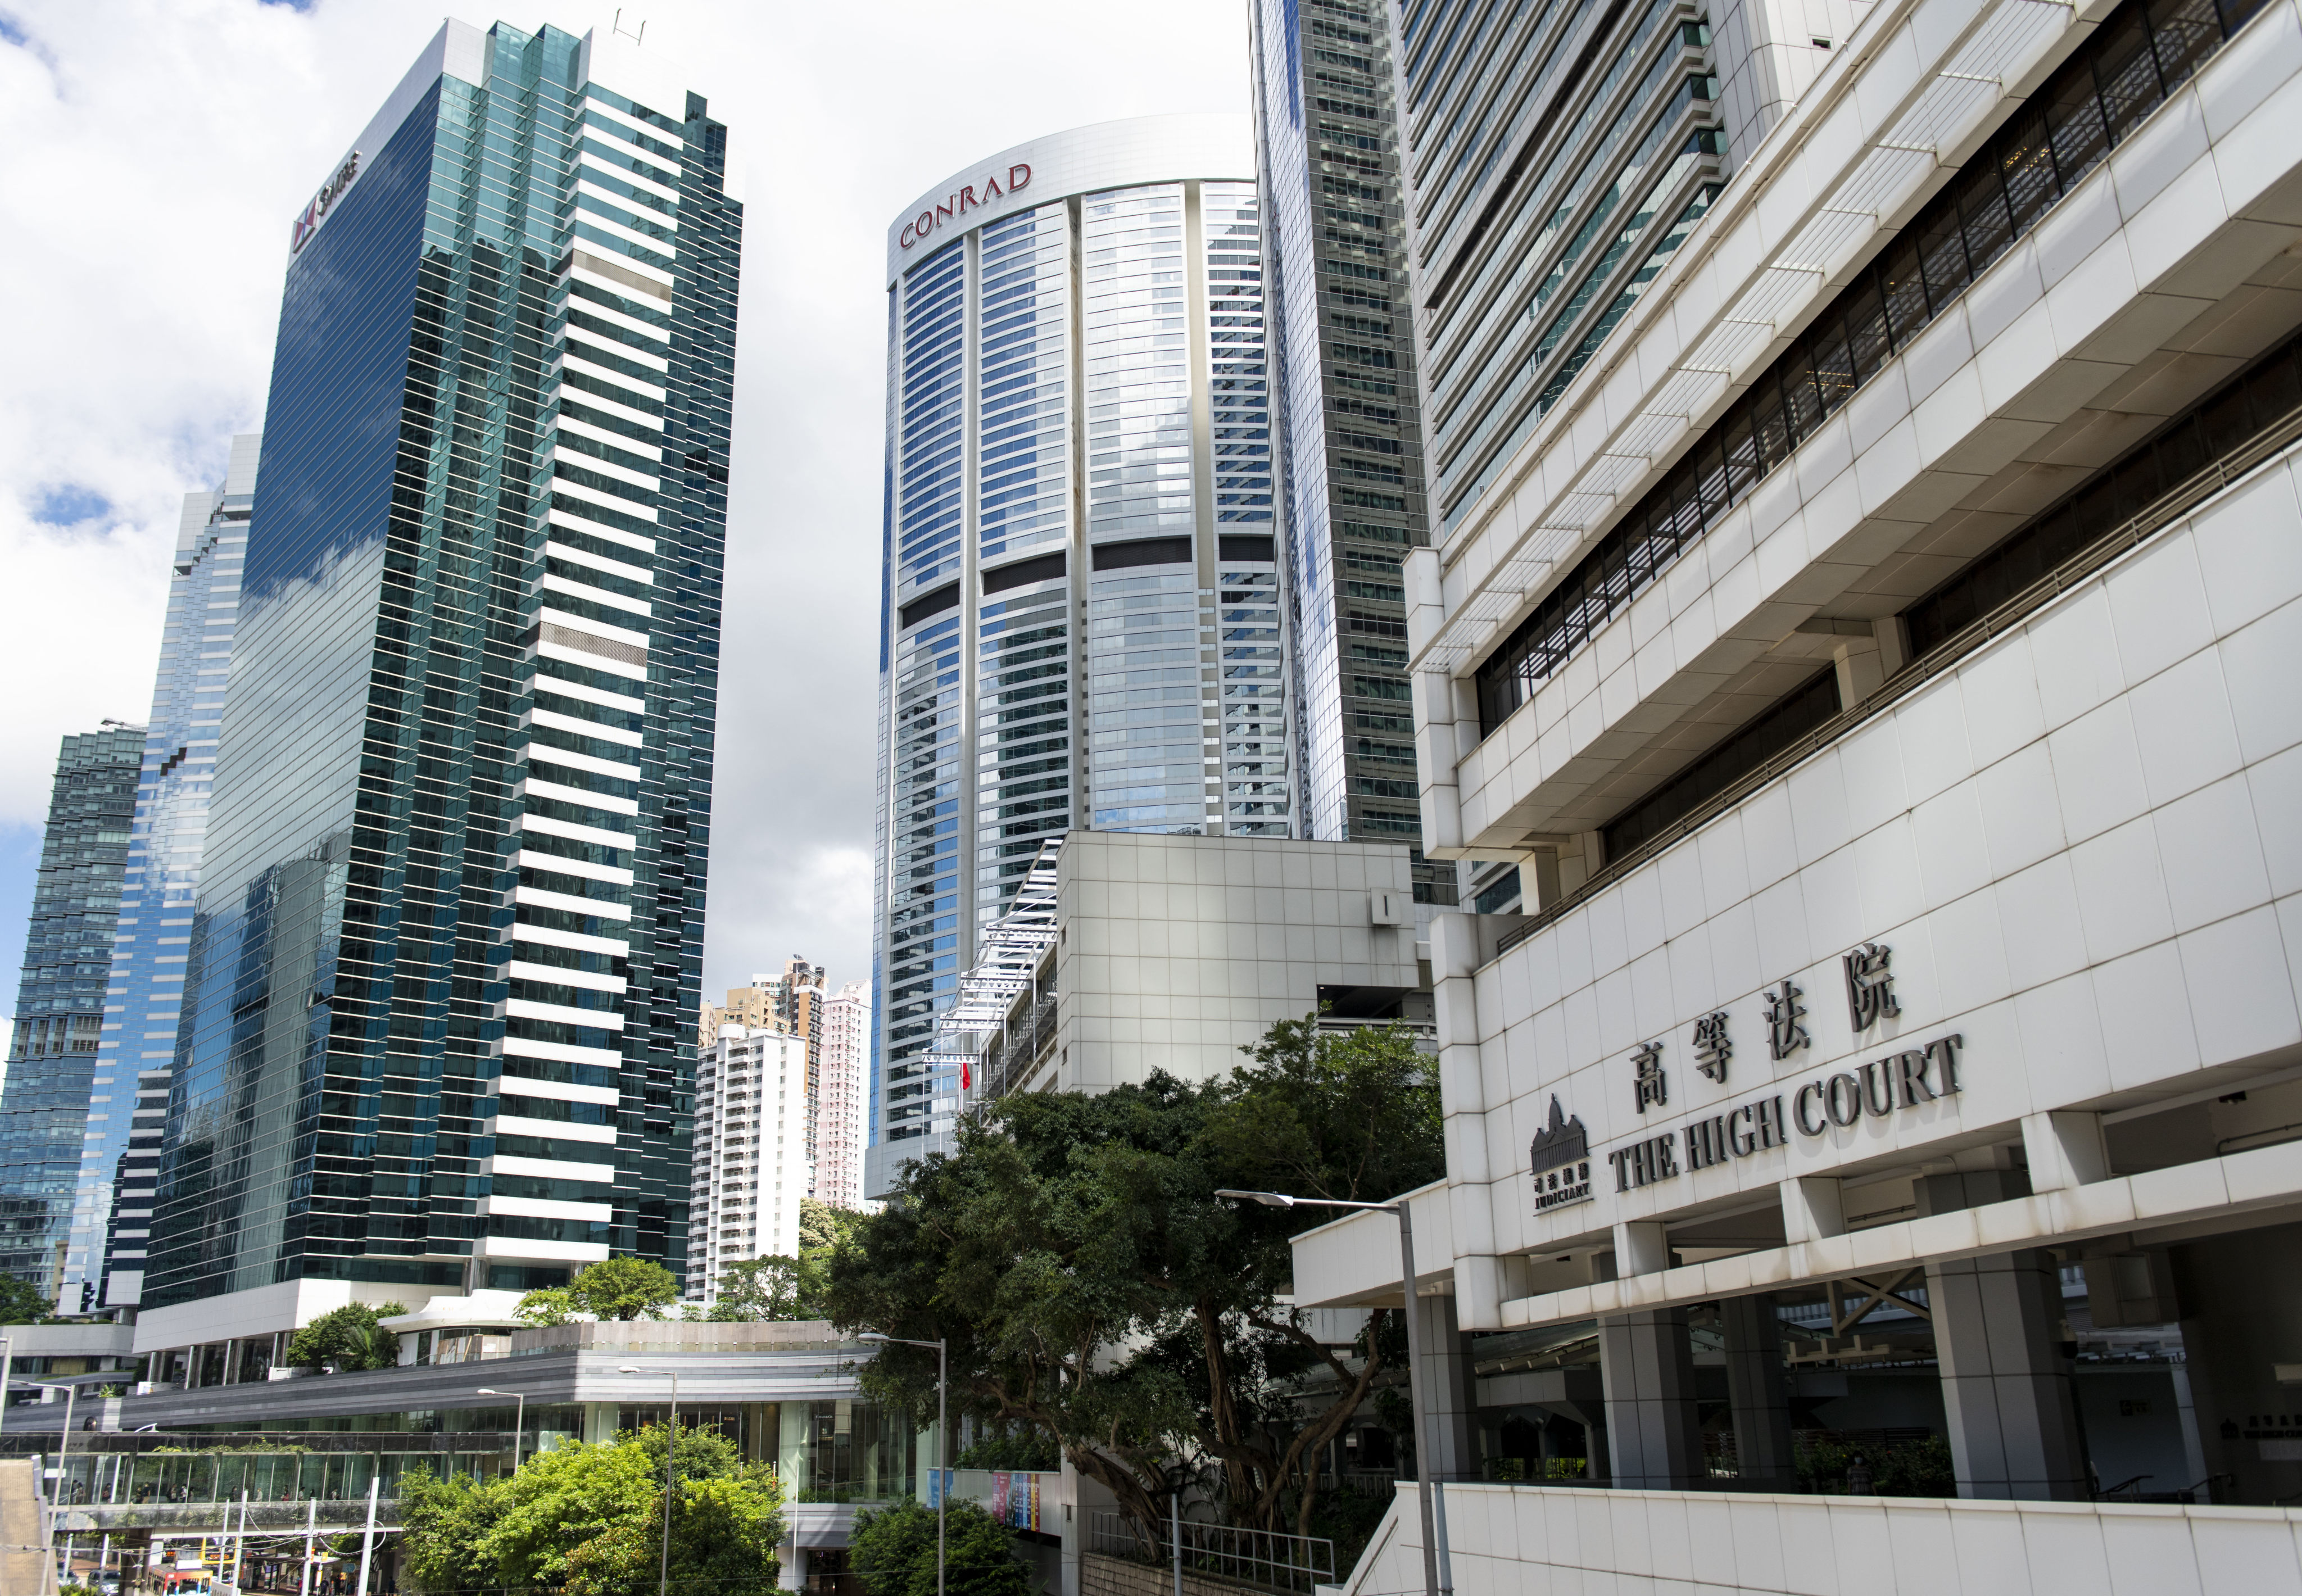 A view of the High Court in Admiralty. A man was recently given probation for helping his terminally ill wife to end her life, prompting calls for wider discussion of the issue. Photo: Warton Li